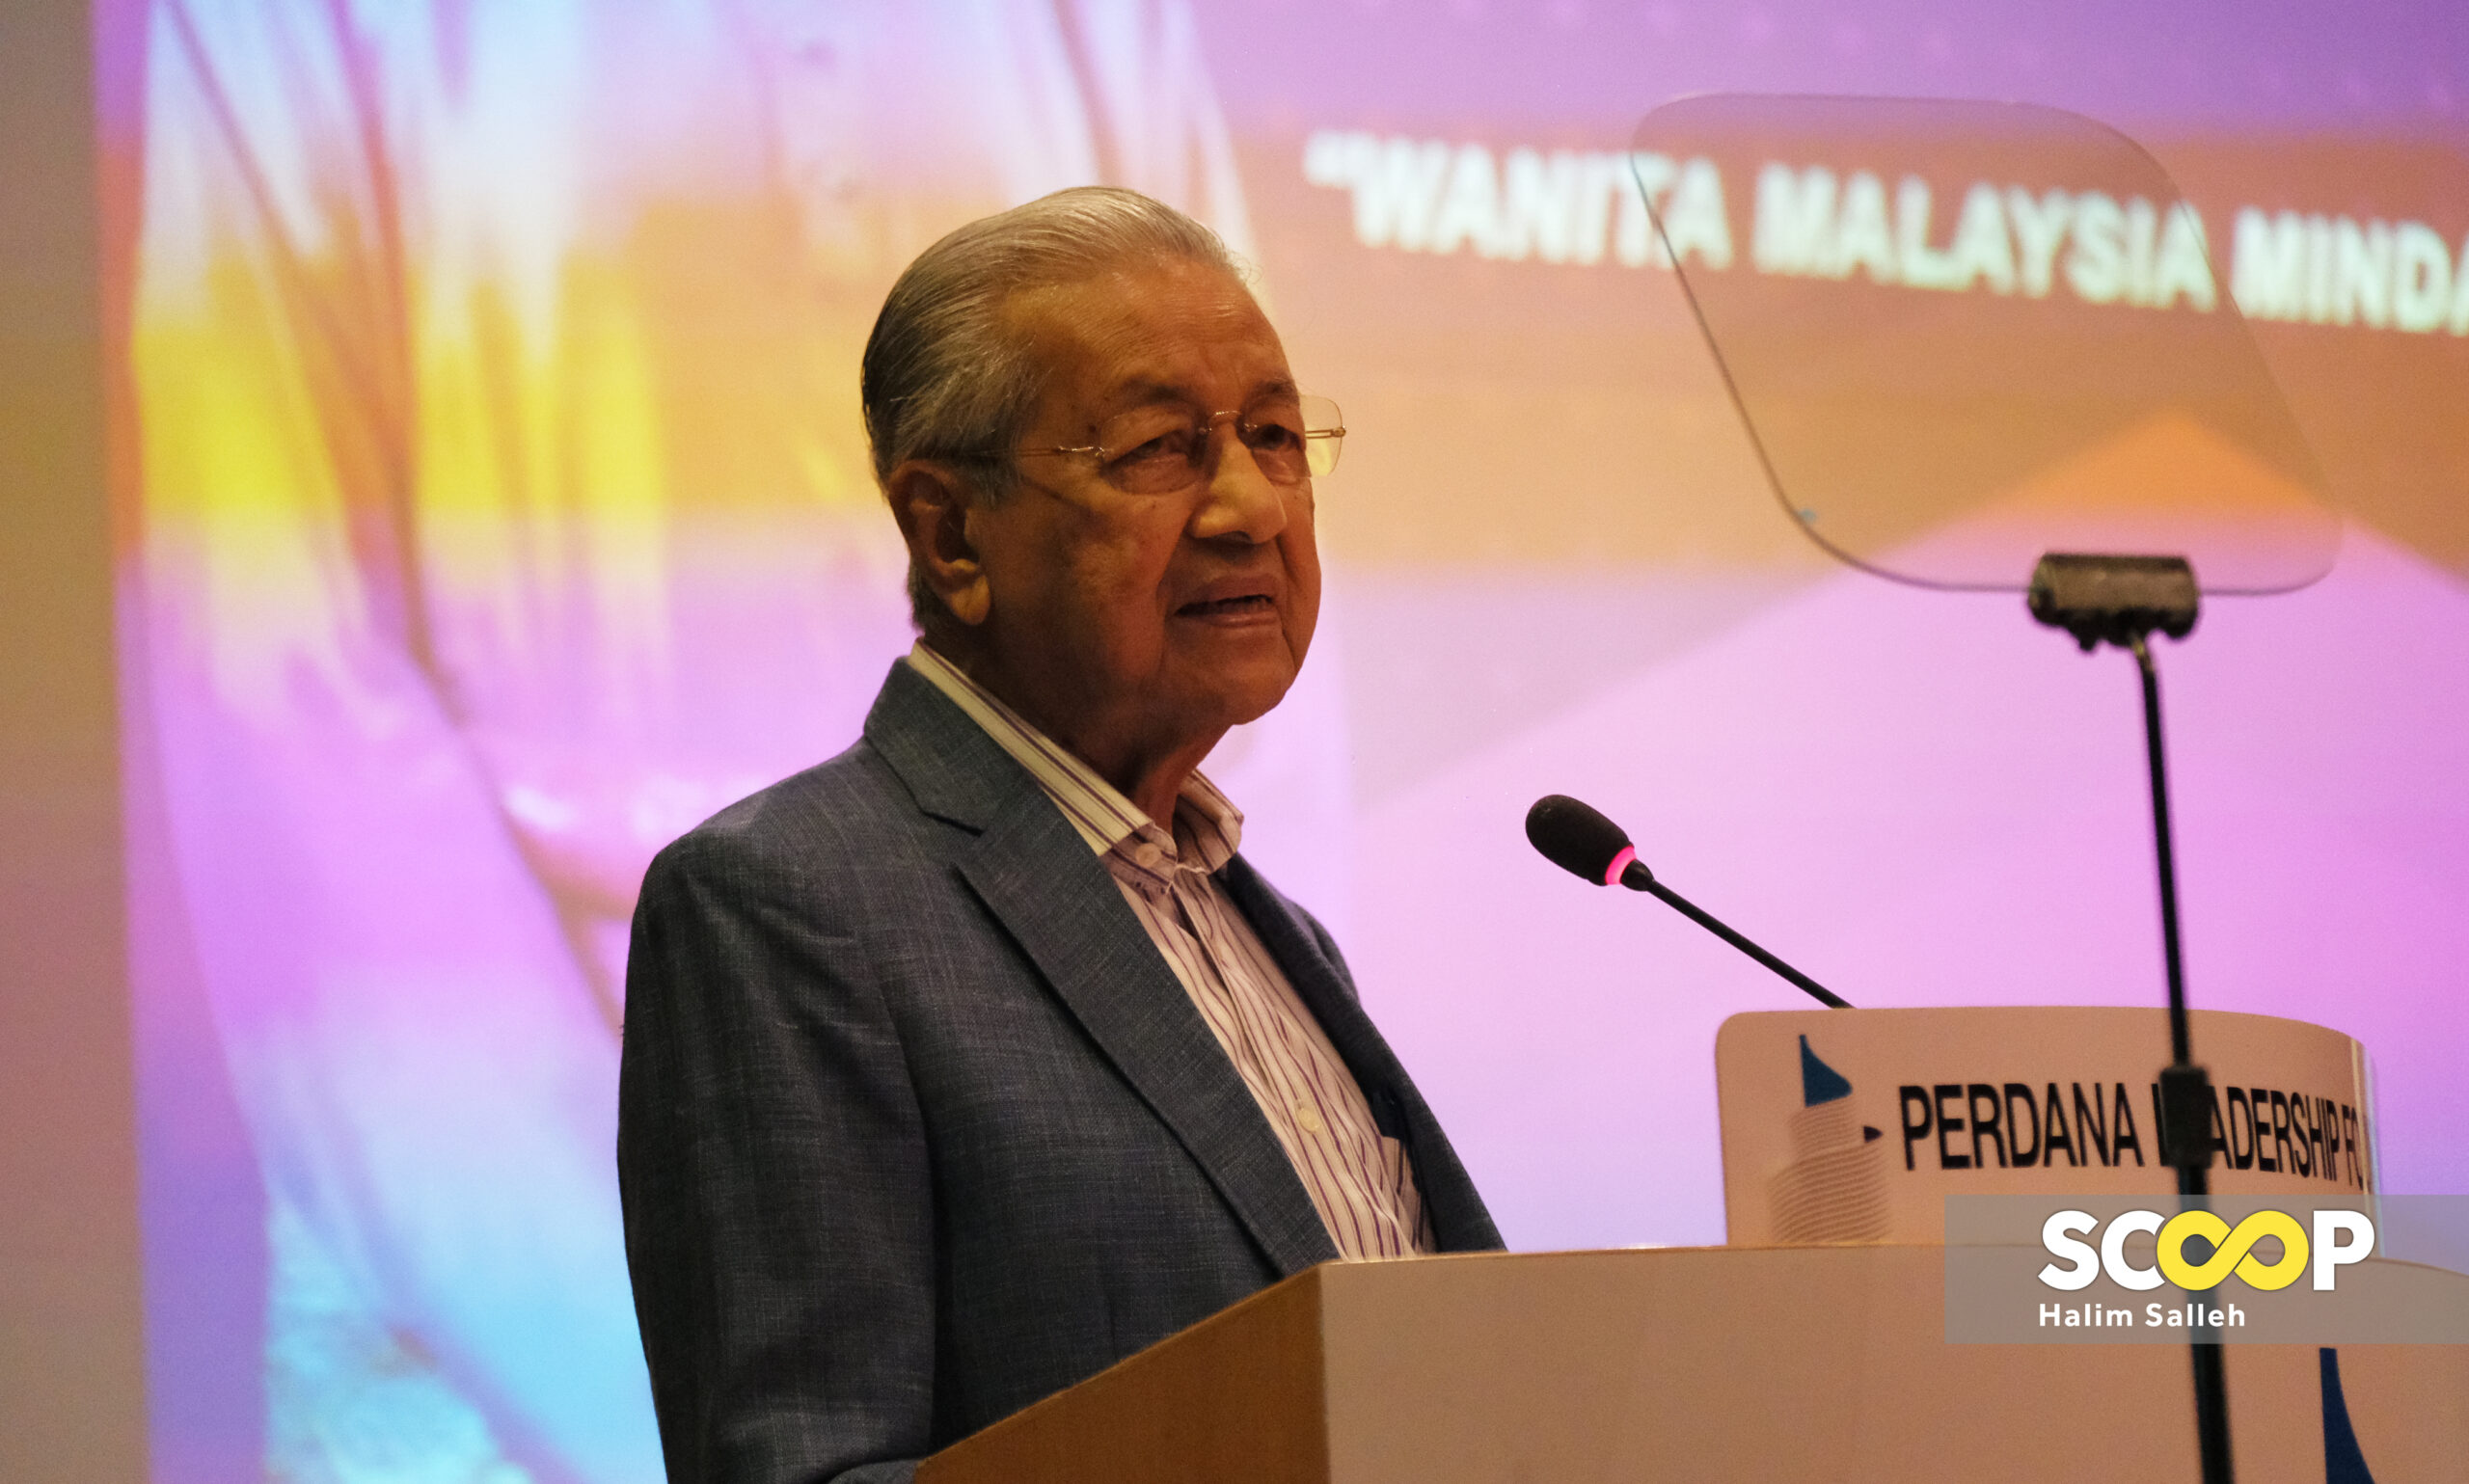 No genocide at that time, Dr Mahathir says on 2018 BlackRock meeting